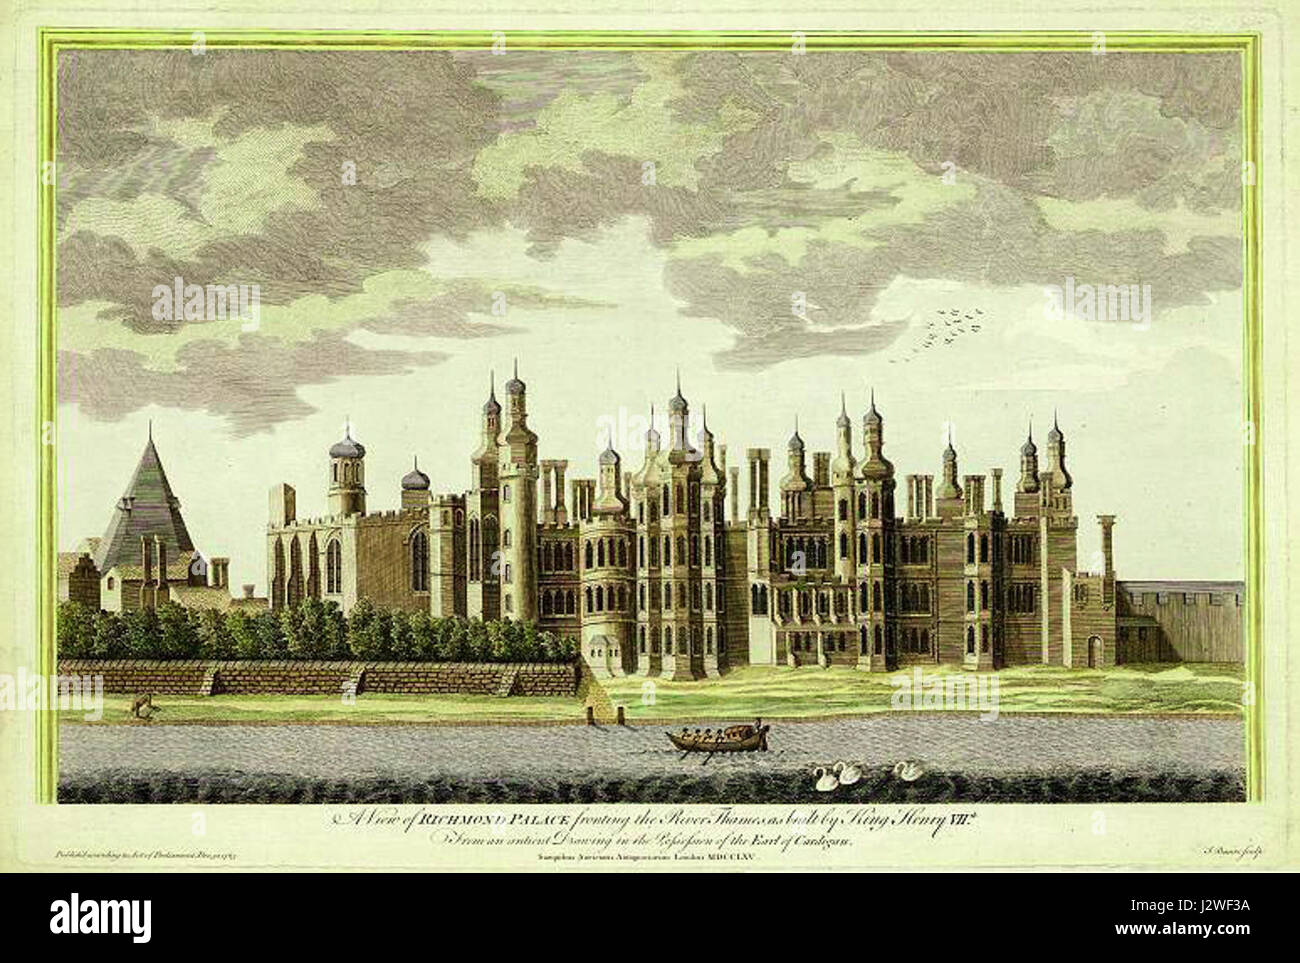 A View of Richmond Palace published in 1765 Stock Photo